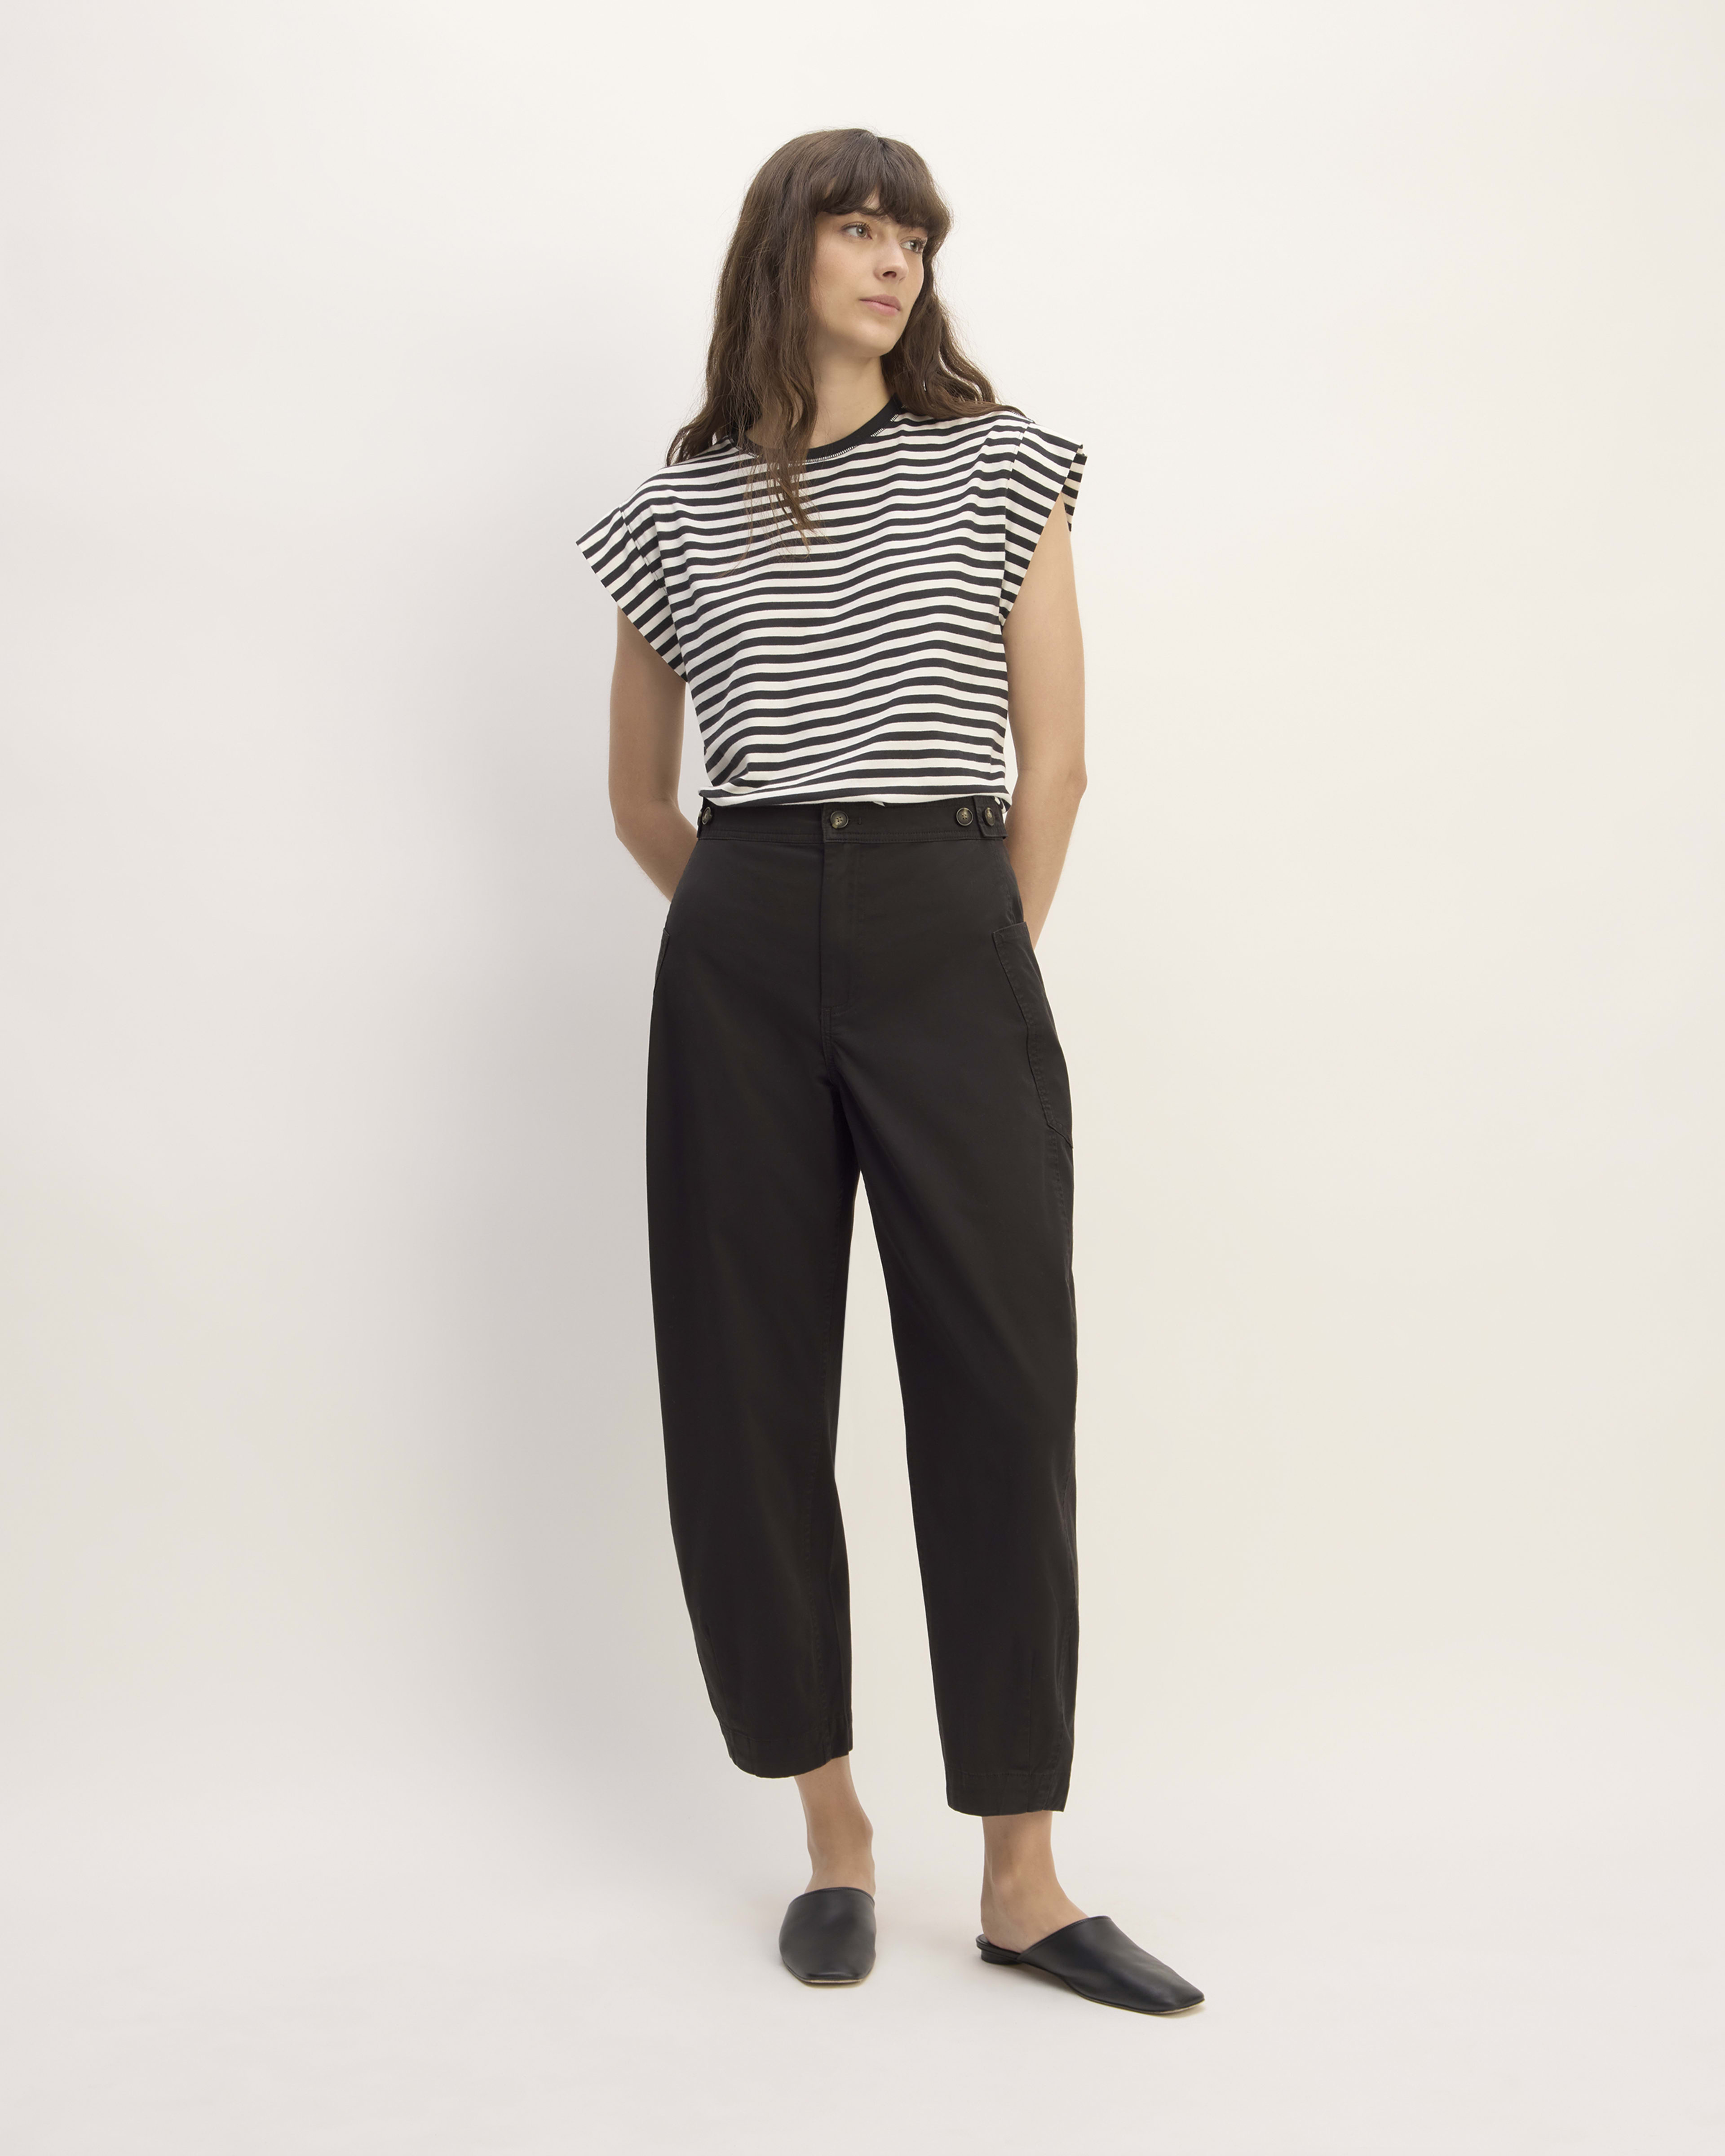 Elevated, versatile style inspo from @jordanrisa in our new Dream Kick  Flare pant. #Everlane #EverlaneKickFlarePant #TheKickFlarePant #T